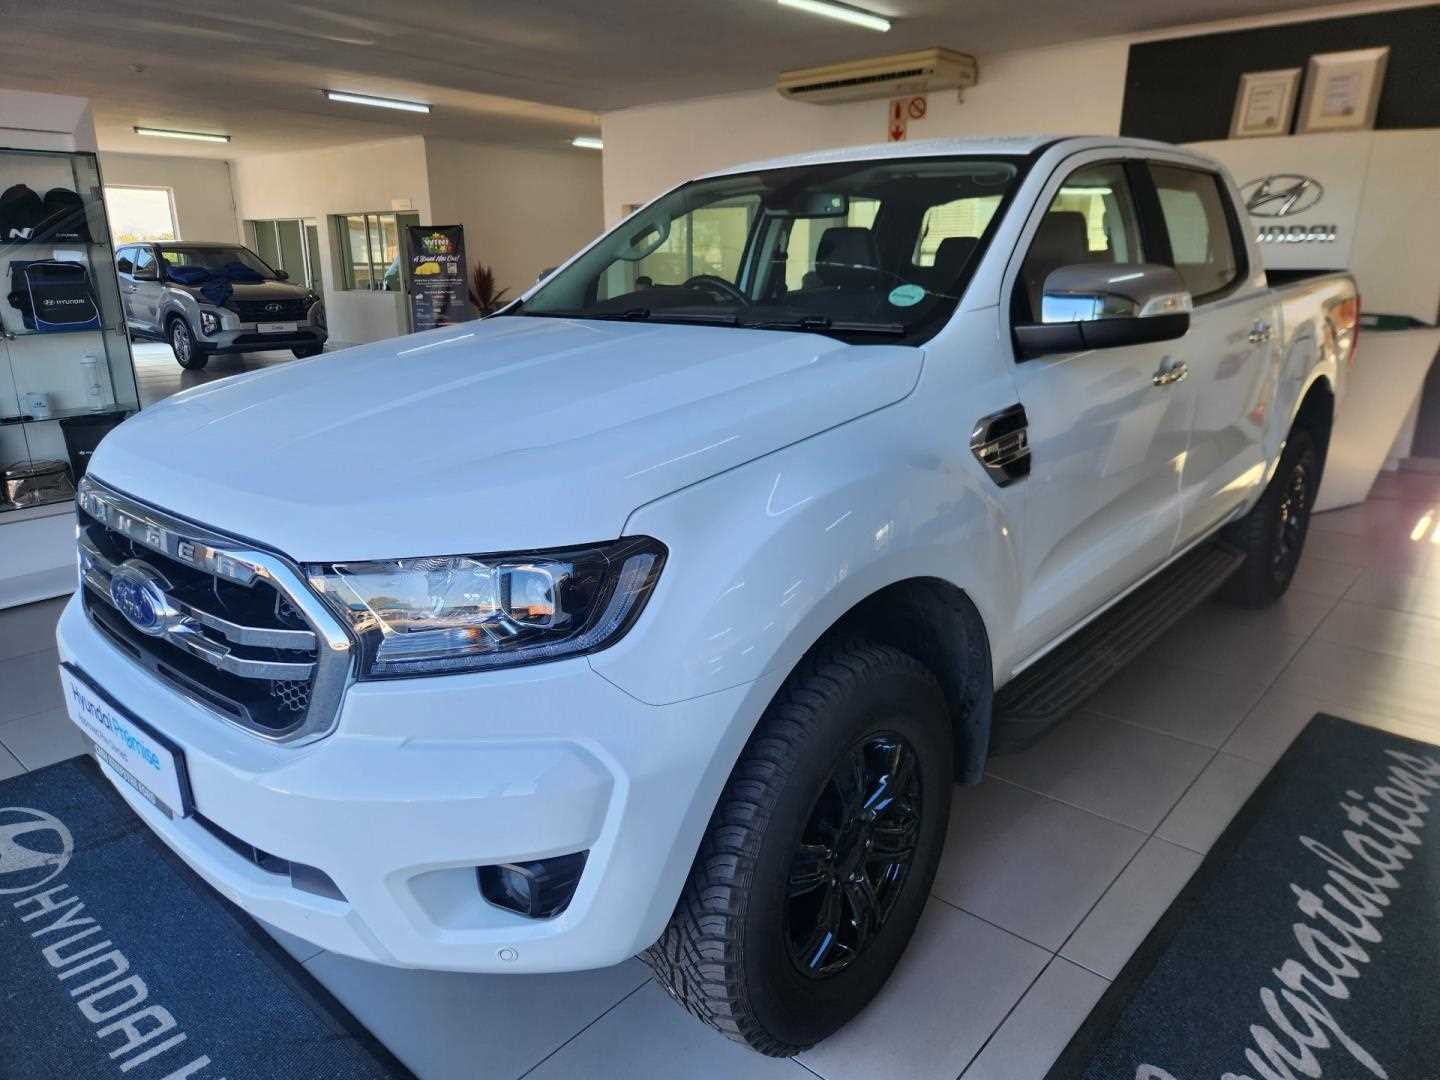 2022 Ford Ranger MY20.75 2.0 Turbo Xlt 4X4 D Cab At for sale, Nigel  - 338027